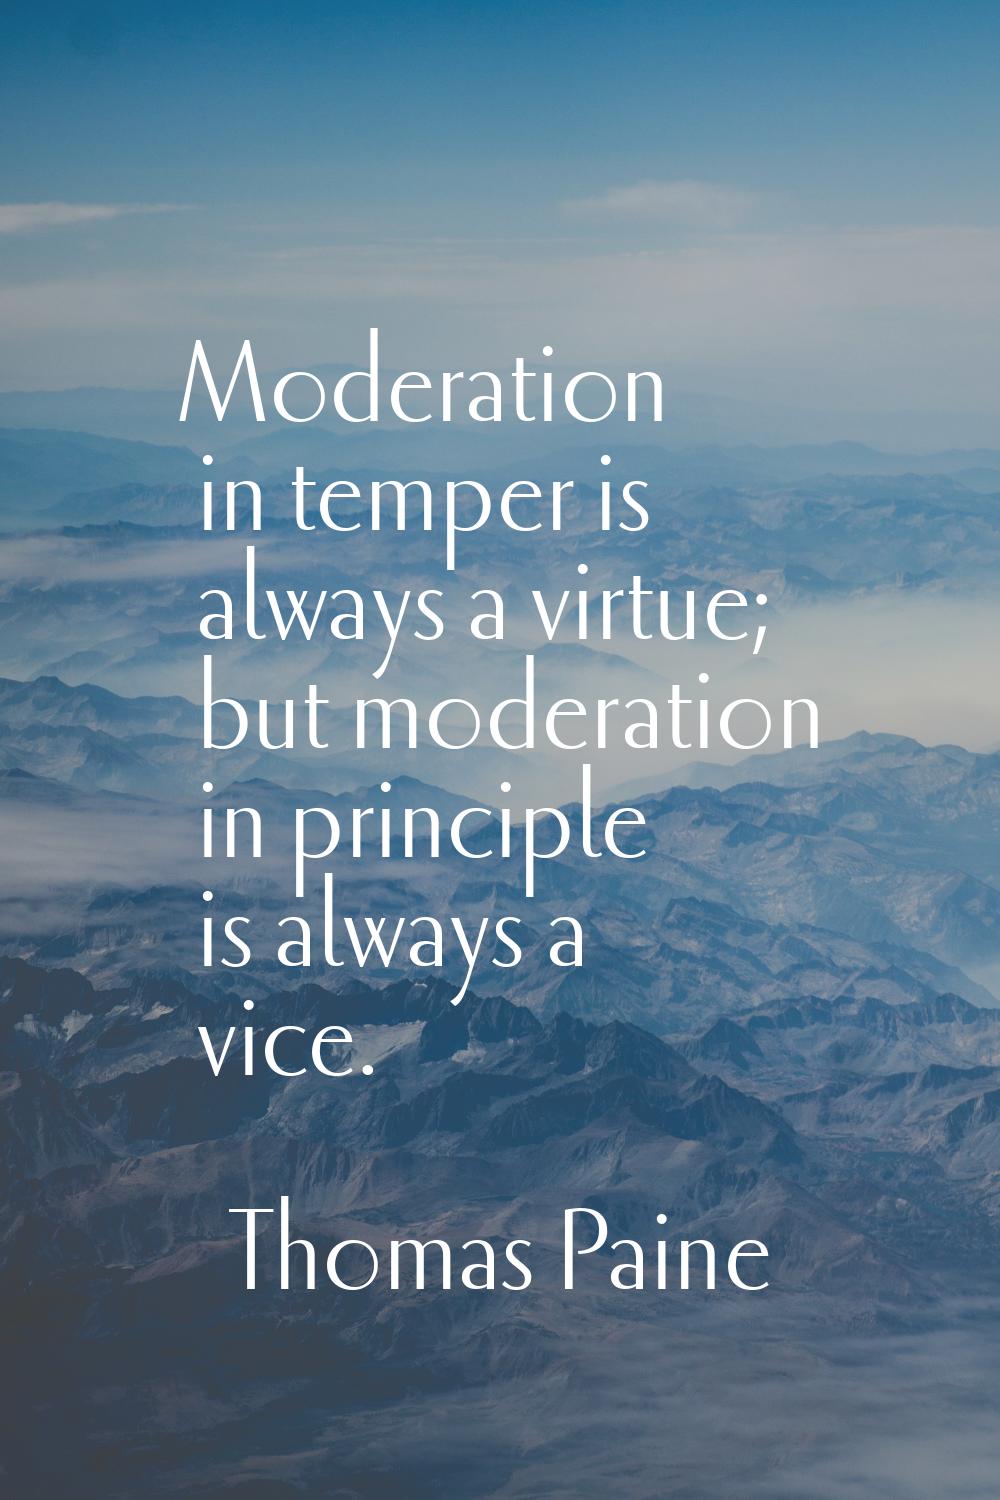 Moderation in temper is always a virtue; but moderation in principle is always a vice.